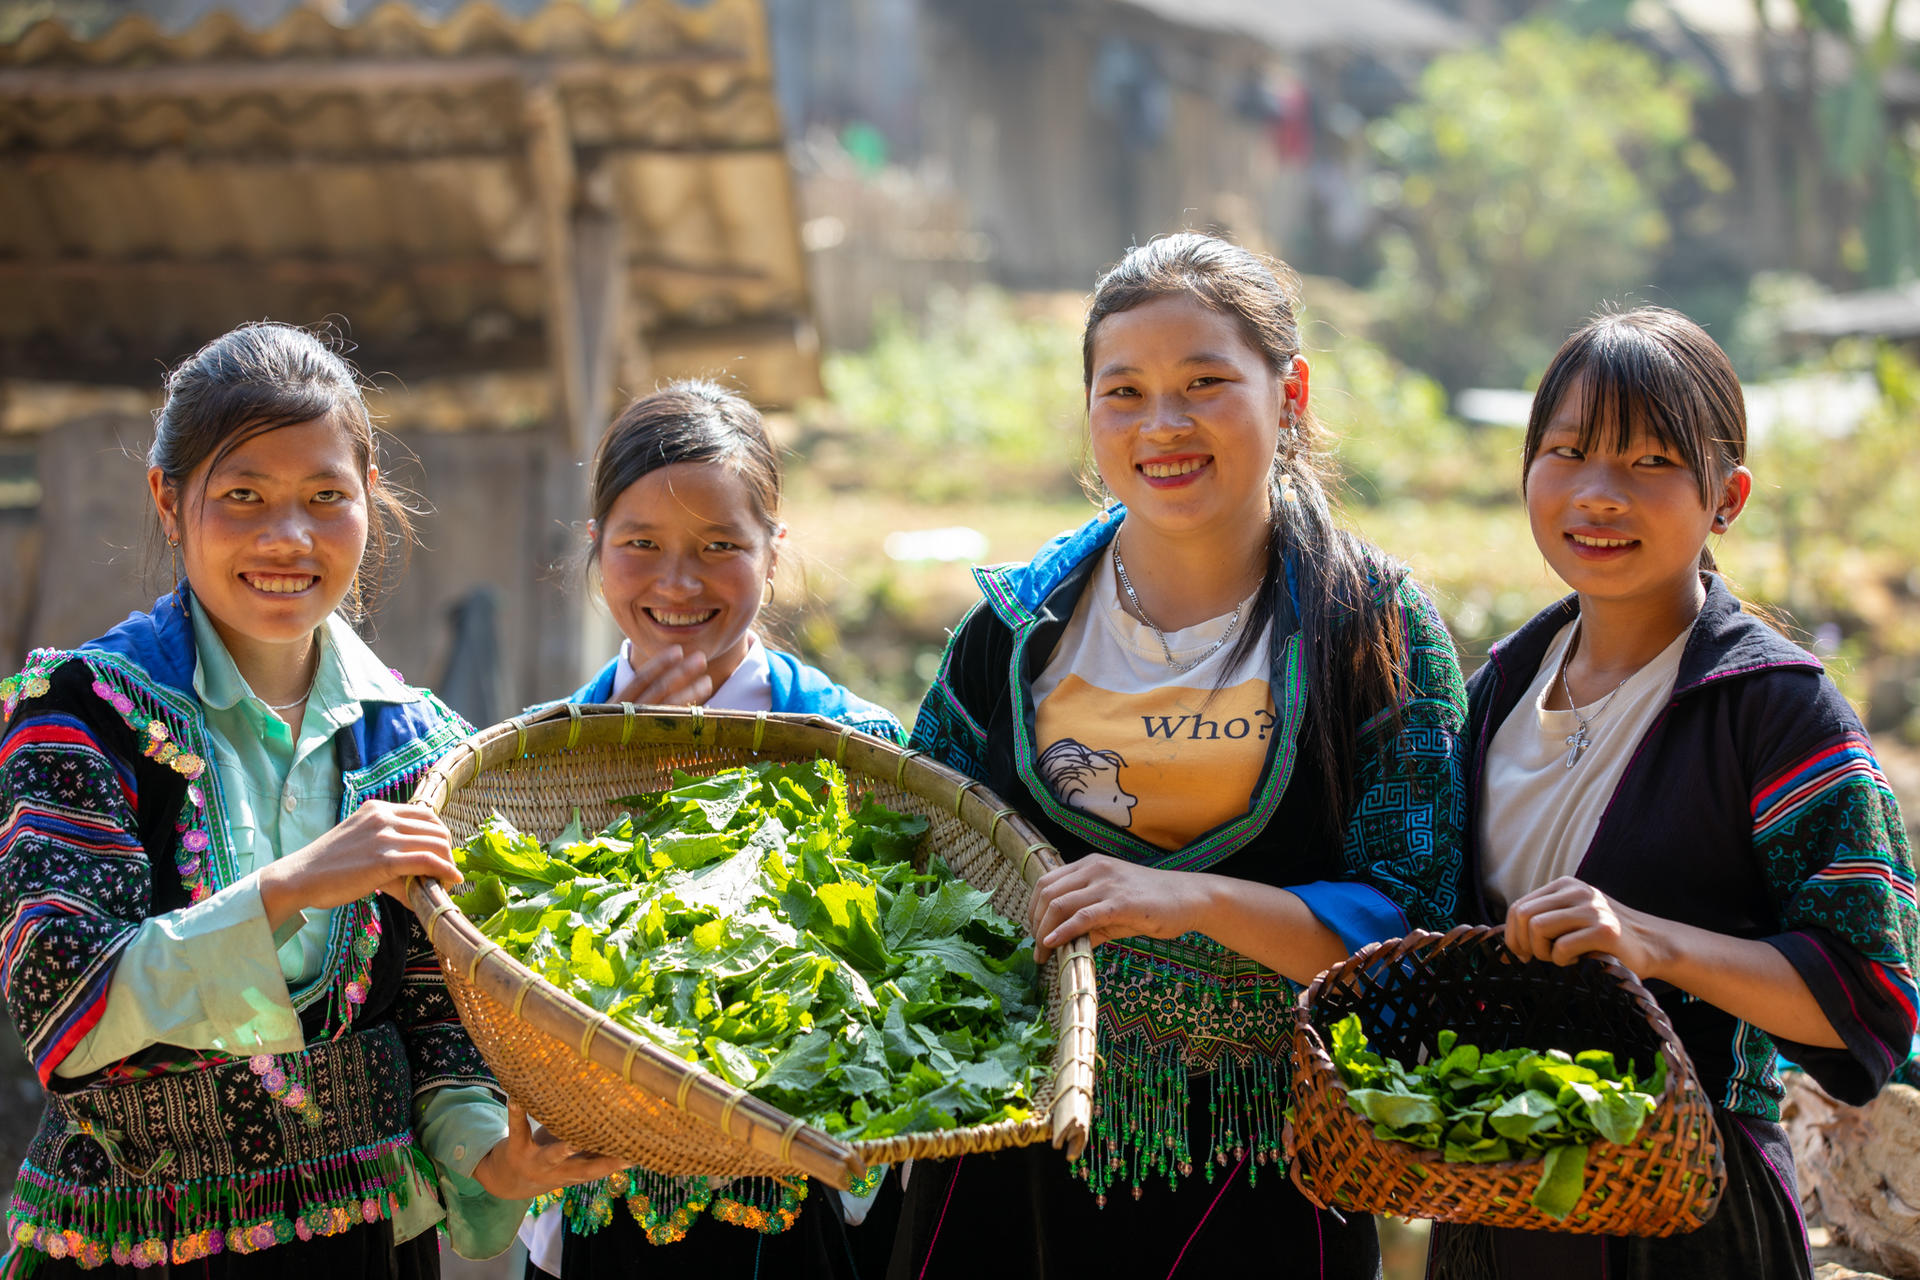 Group of Hmong women showing their harvest of mustard leaves